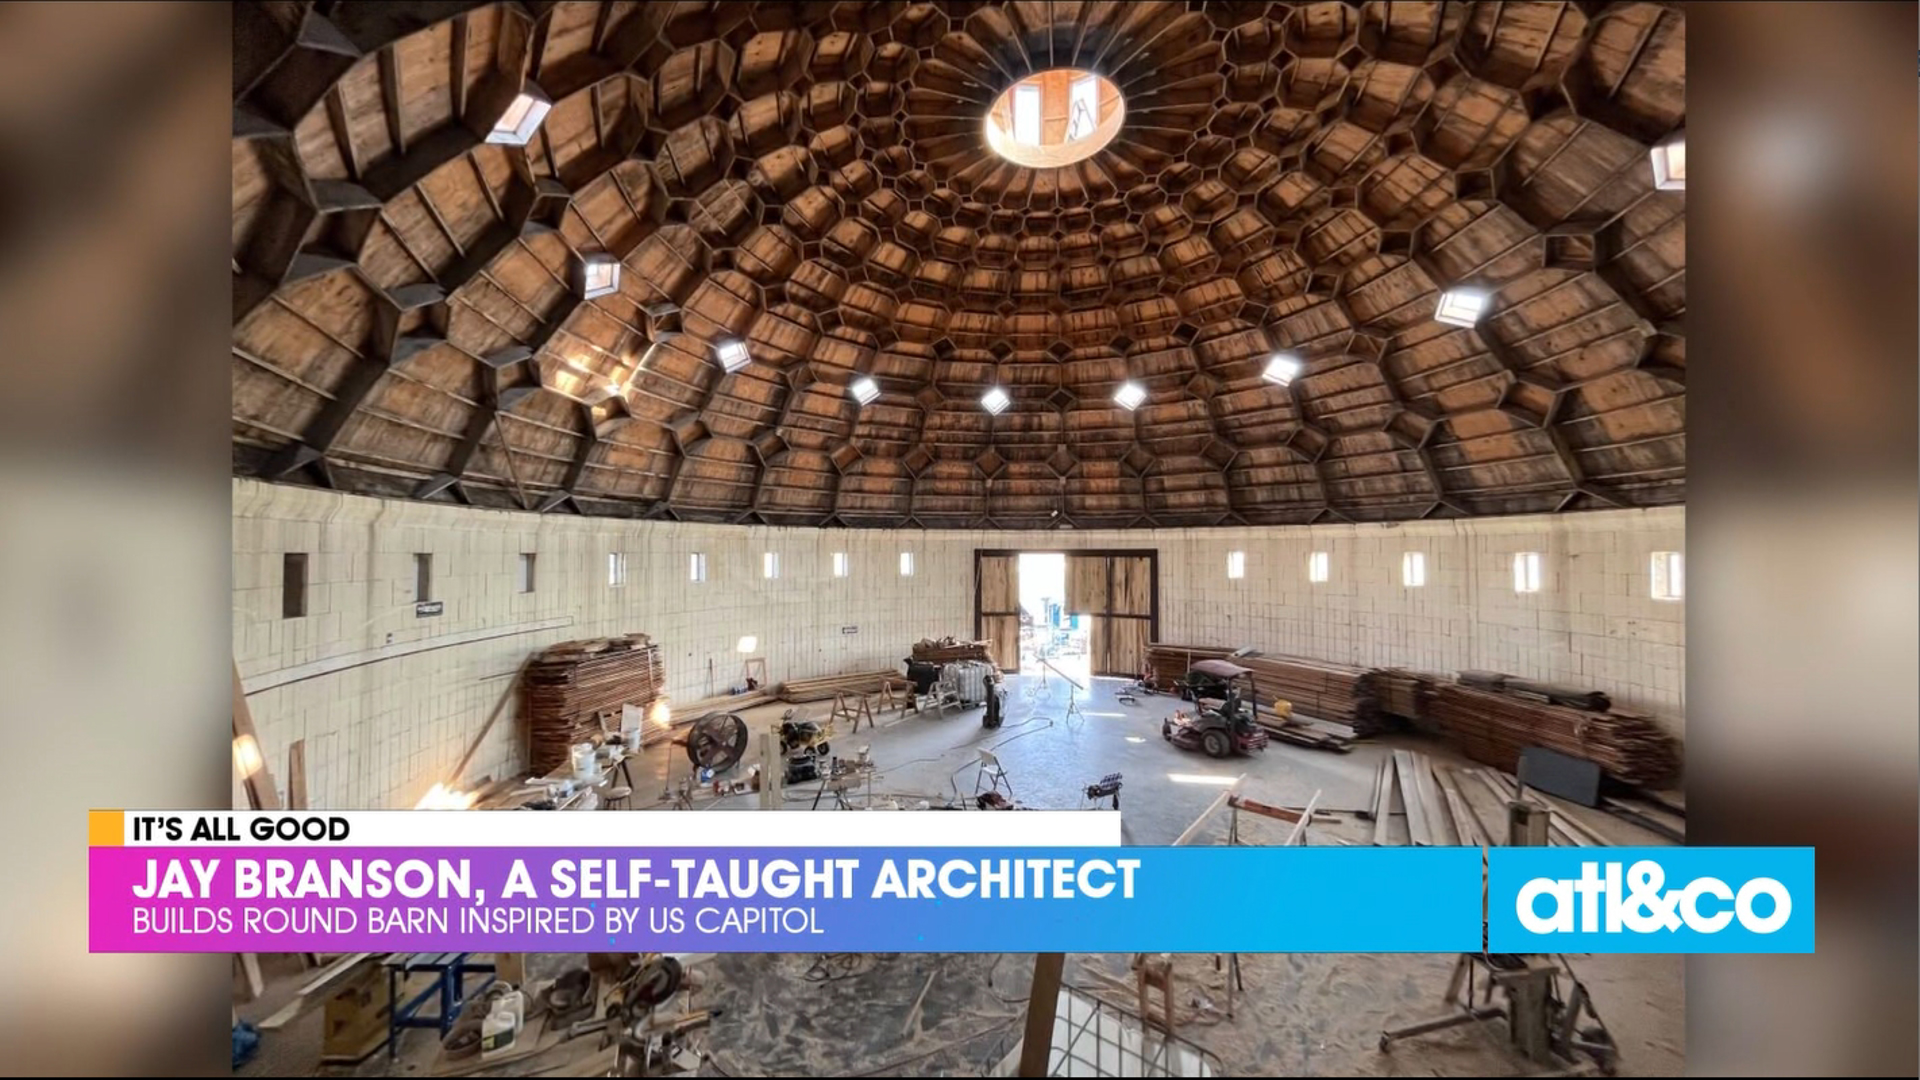 Self-taught architect Jay Branson built a round barn inspired by the U.S. Capitol.